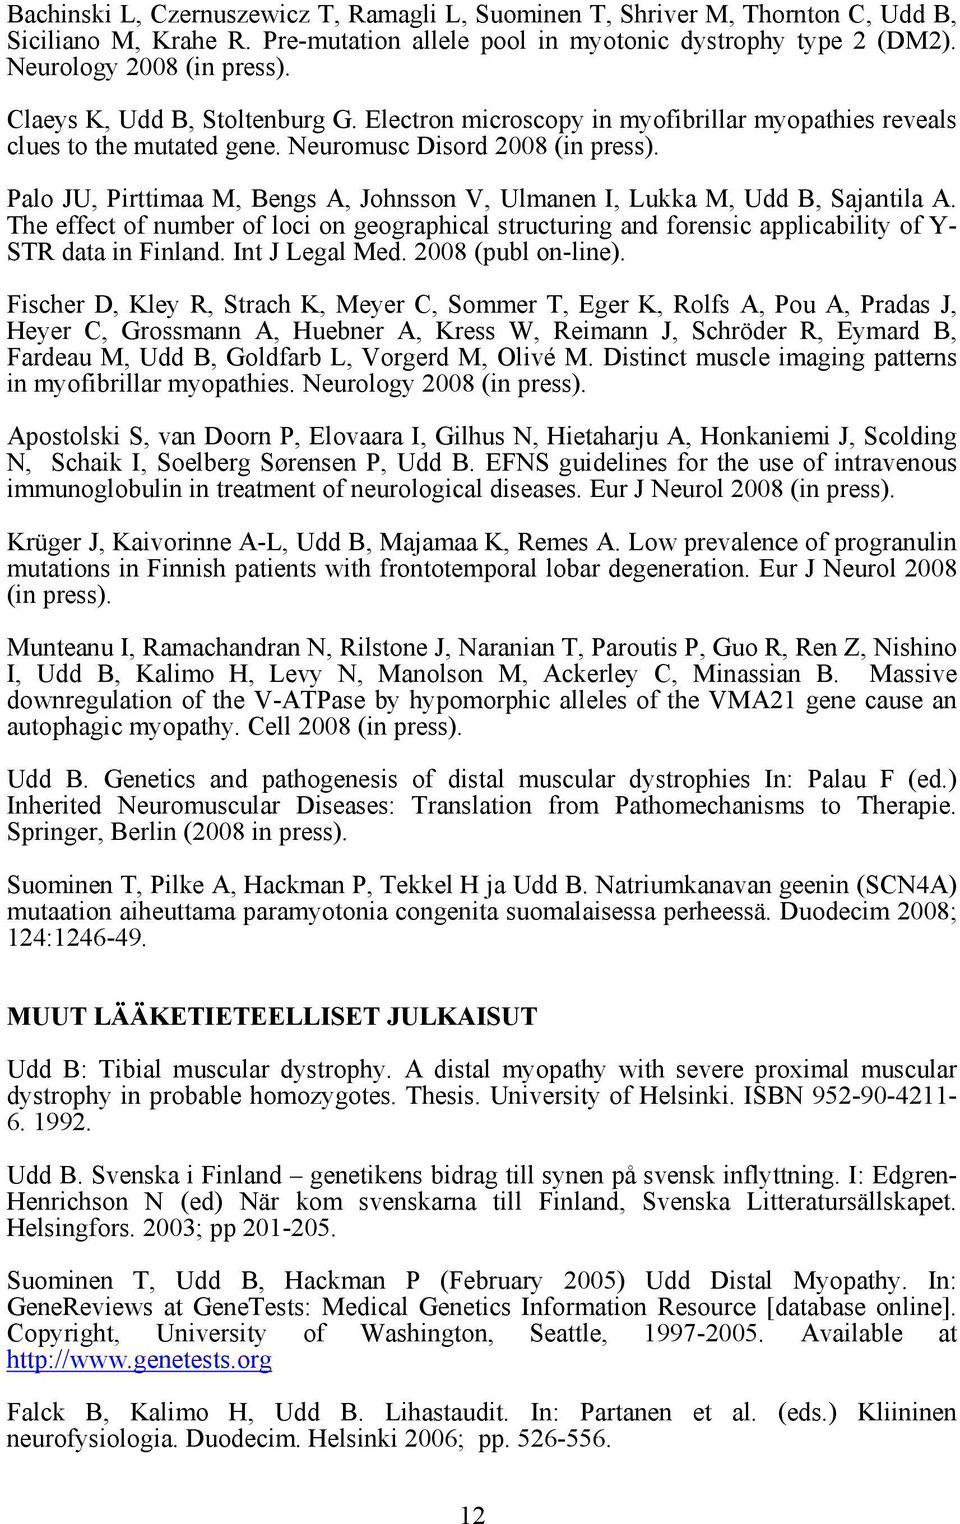 Palo JU, Pirttimaa M, Bengs A, Johnsson V, Ulmanen I, Lukka M, Udd B, Sajantila A. The effect of number of loci on geographical structuring and forensic applicability of Y- STR data in Finland.